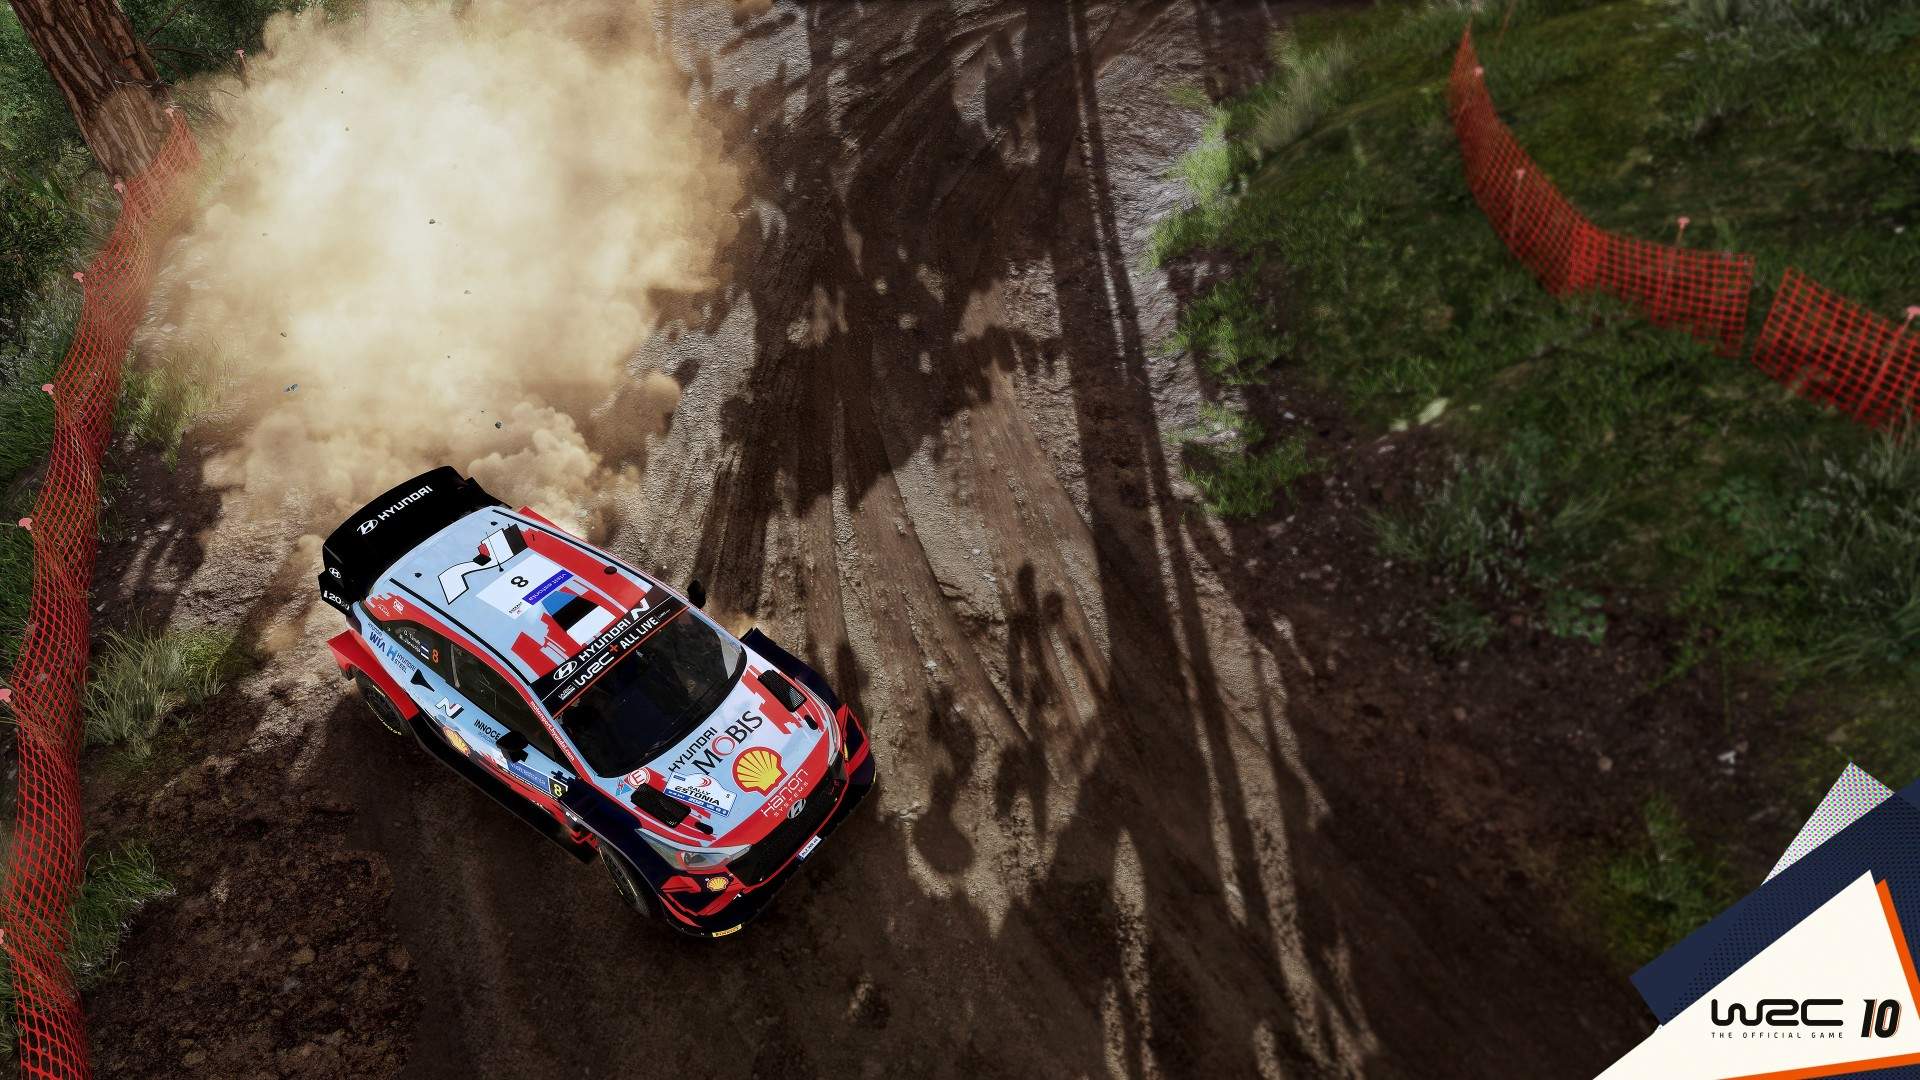 WRC 10 – September 7 - Optimized for Xbox Series X|S